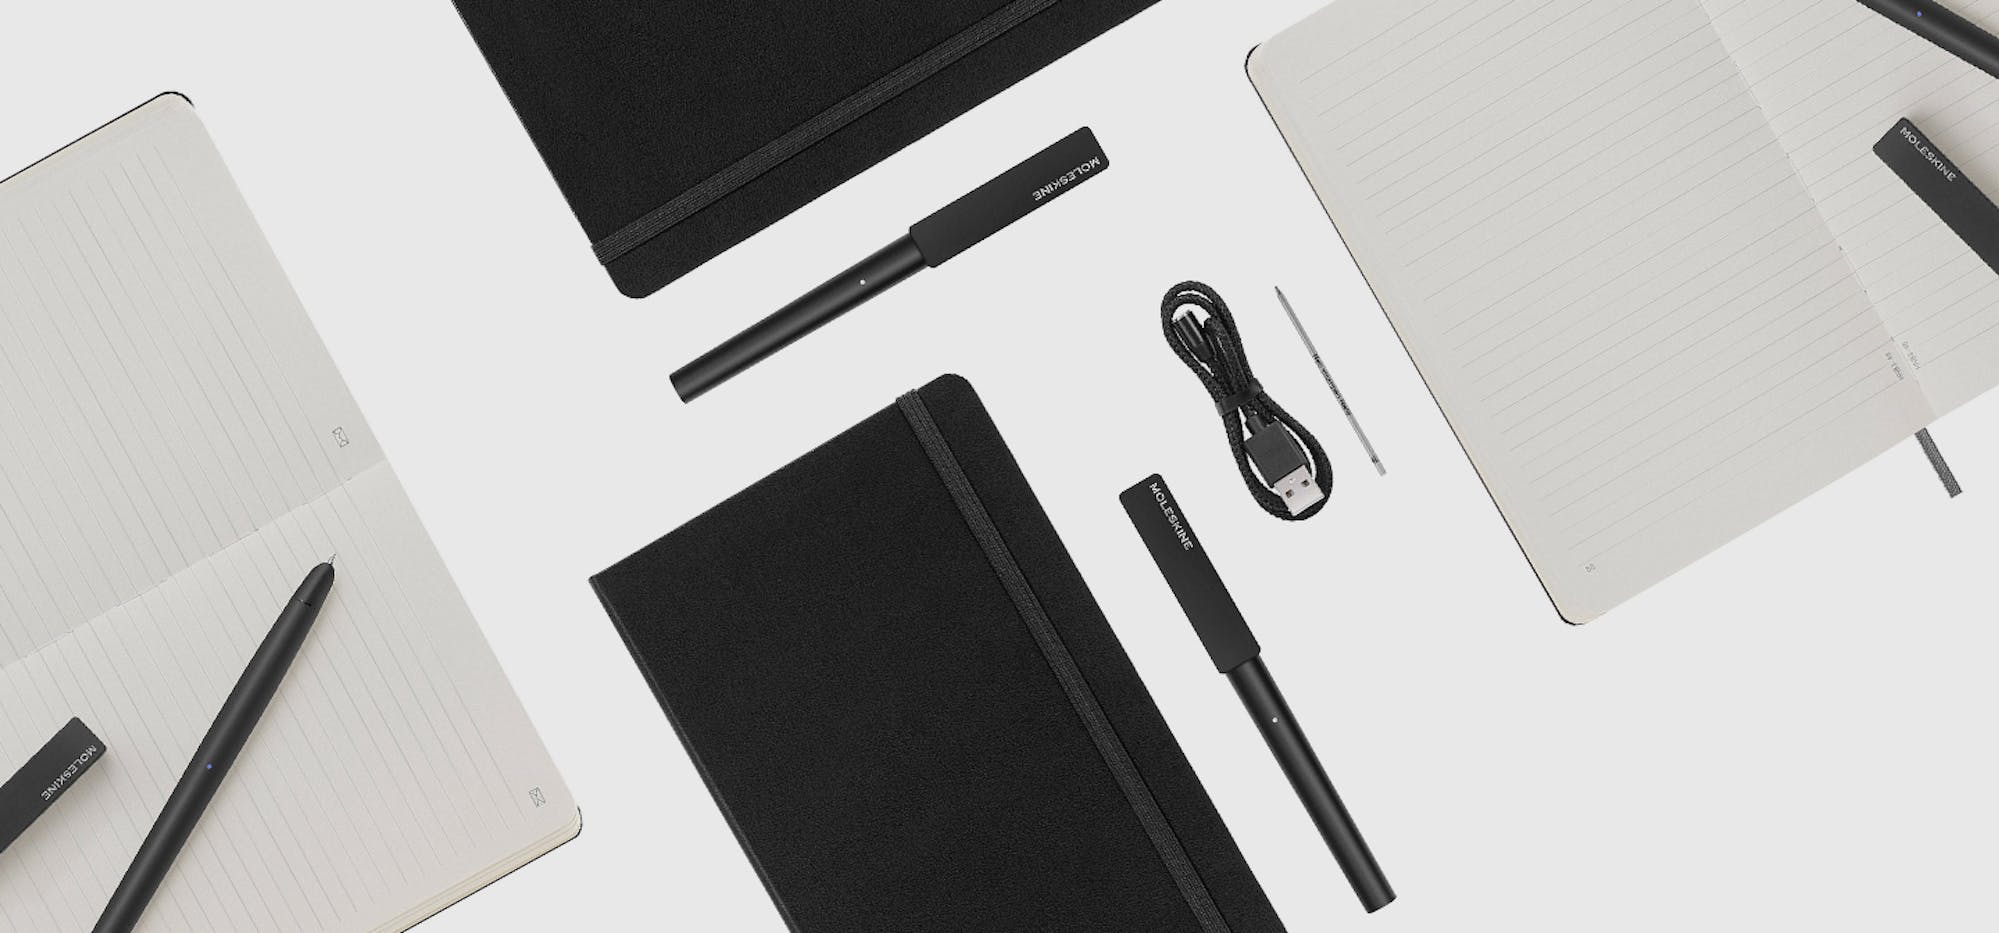 Moleskine launches its Smart Writing Set to digitize your